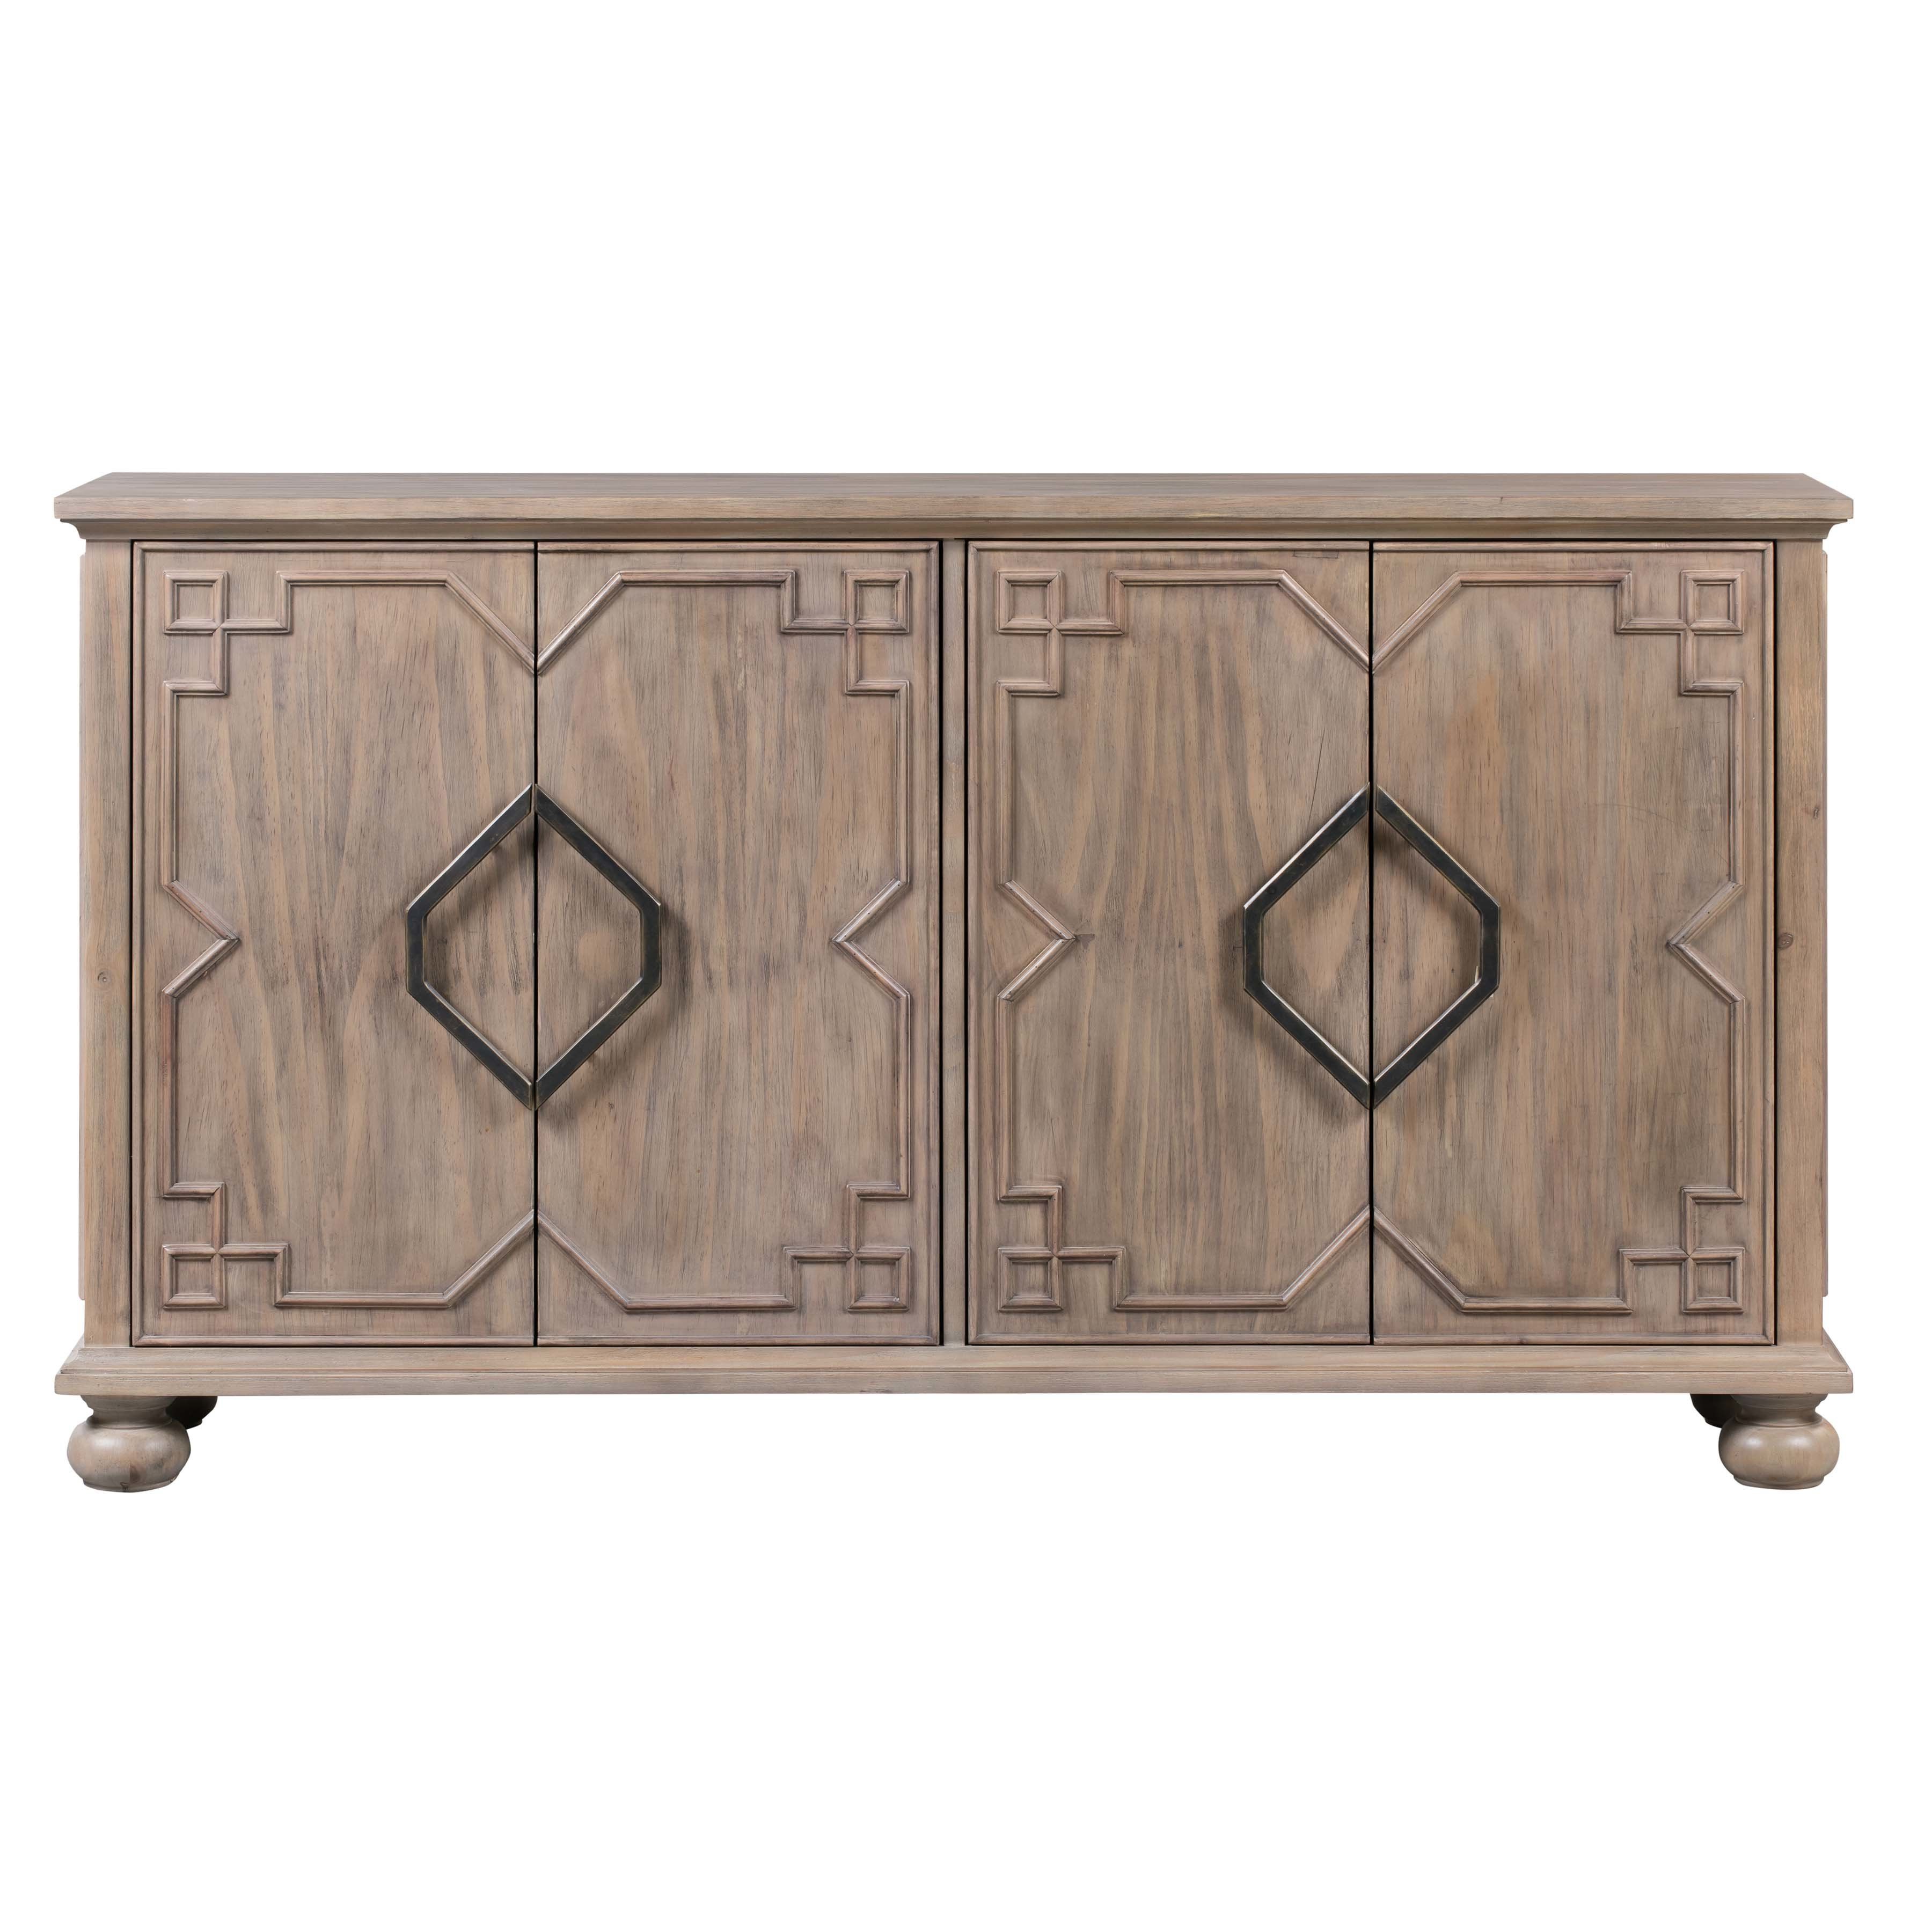 Remington Sideboard | Joss & Main With Remington Sideboards (View 5 of 20)